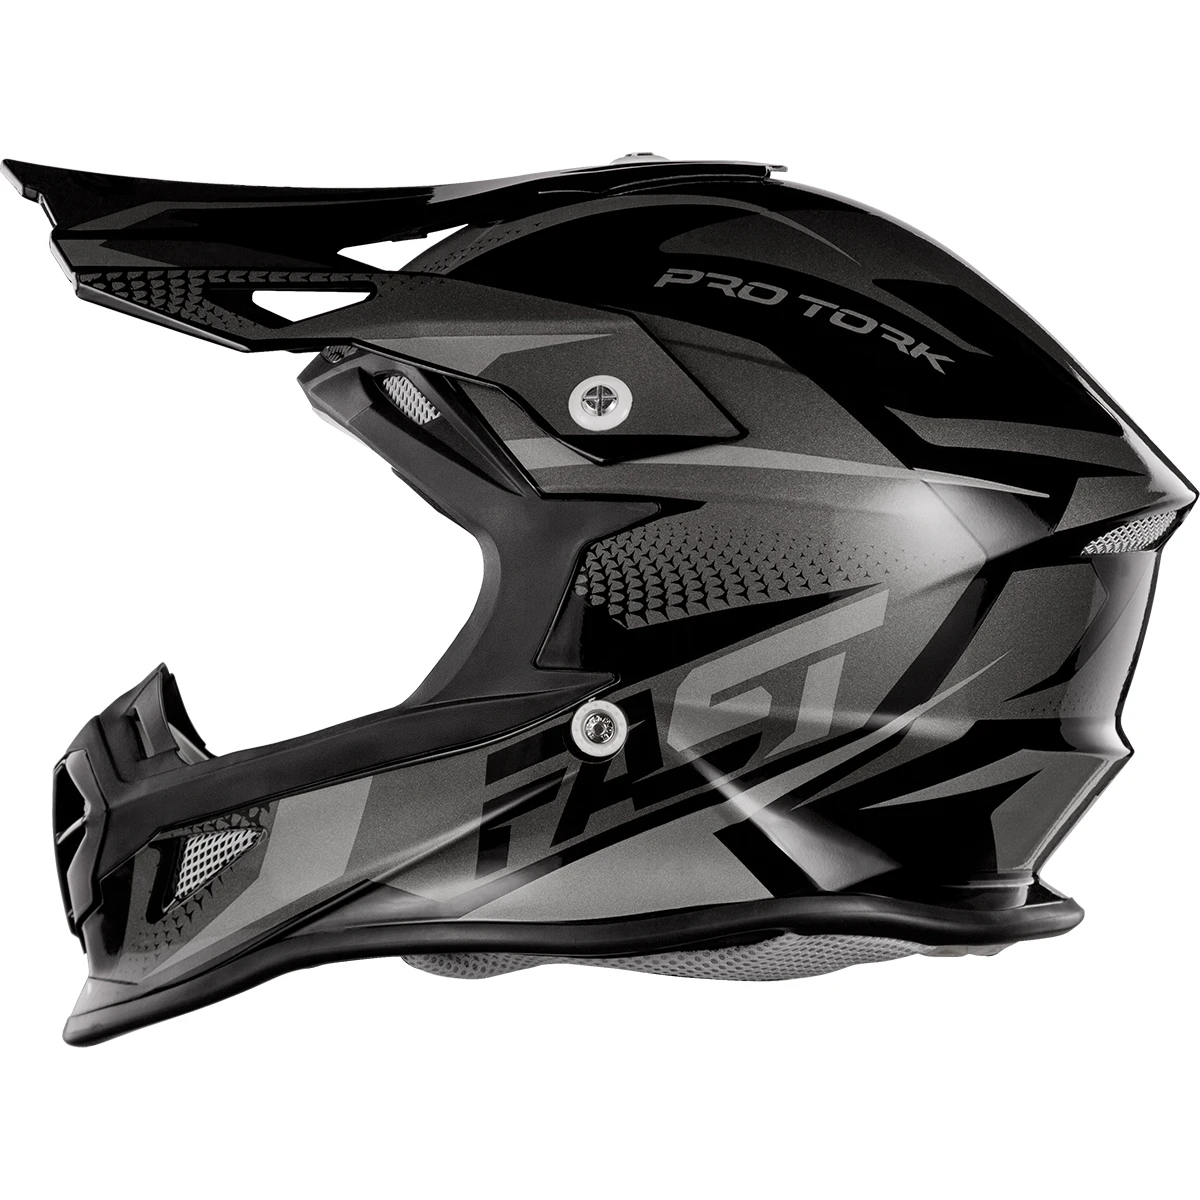 Capacete Off Road Pro Tork Fast Tech Fantasy Limited Edition